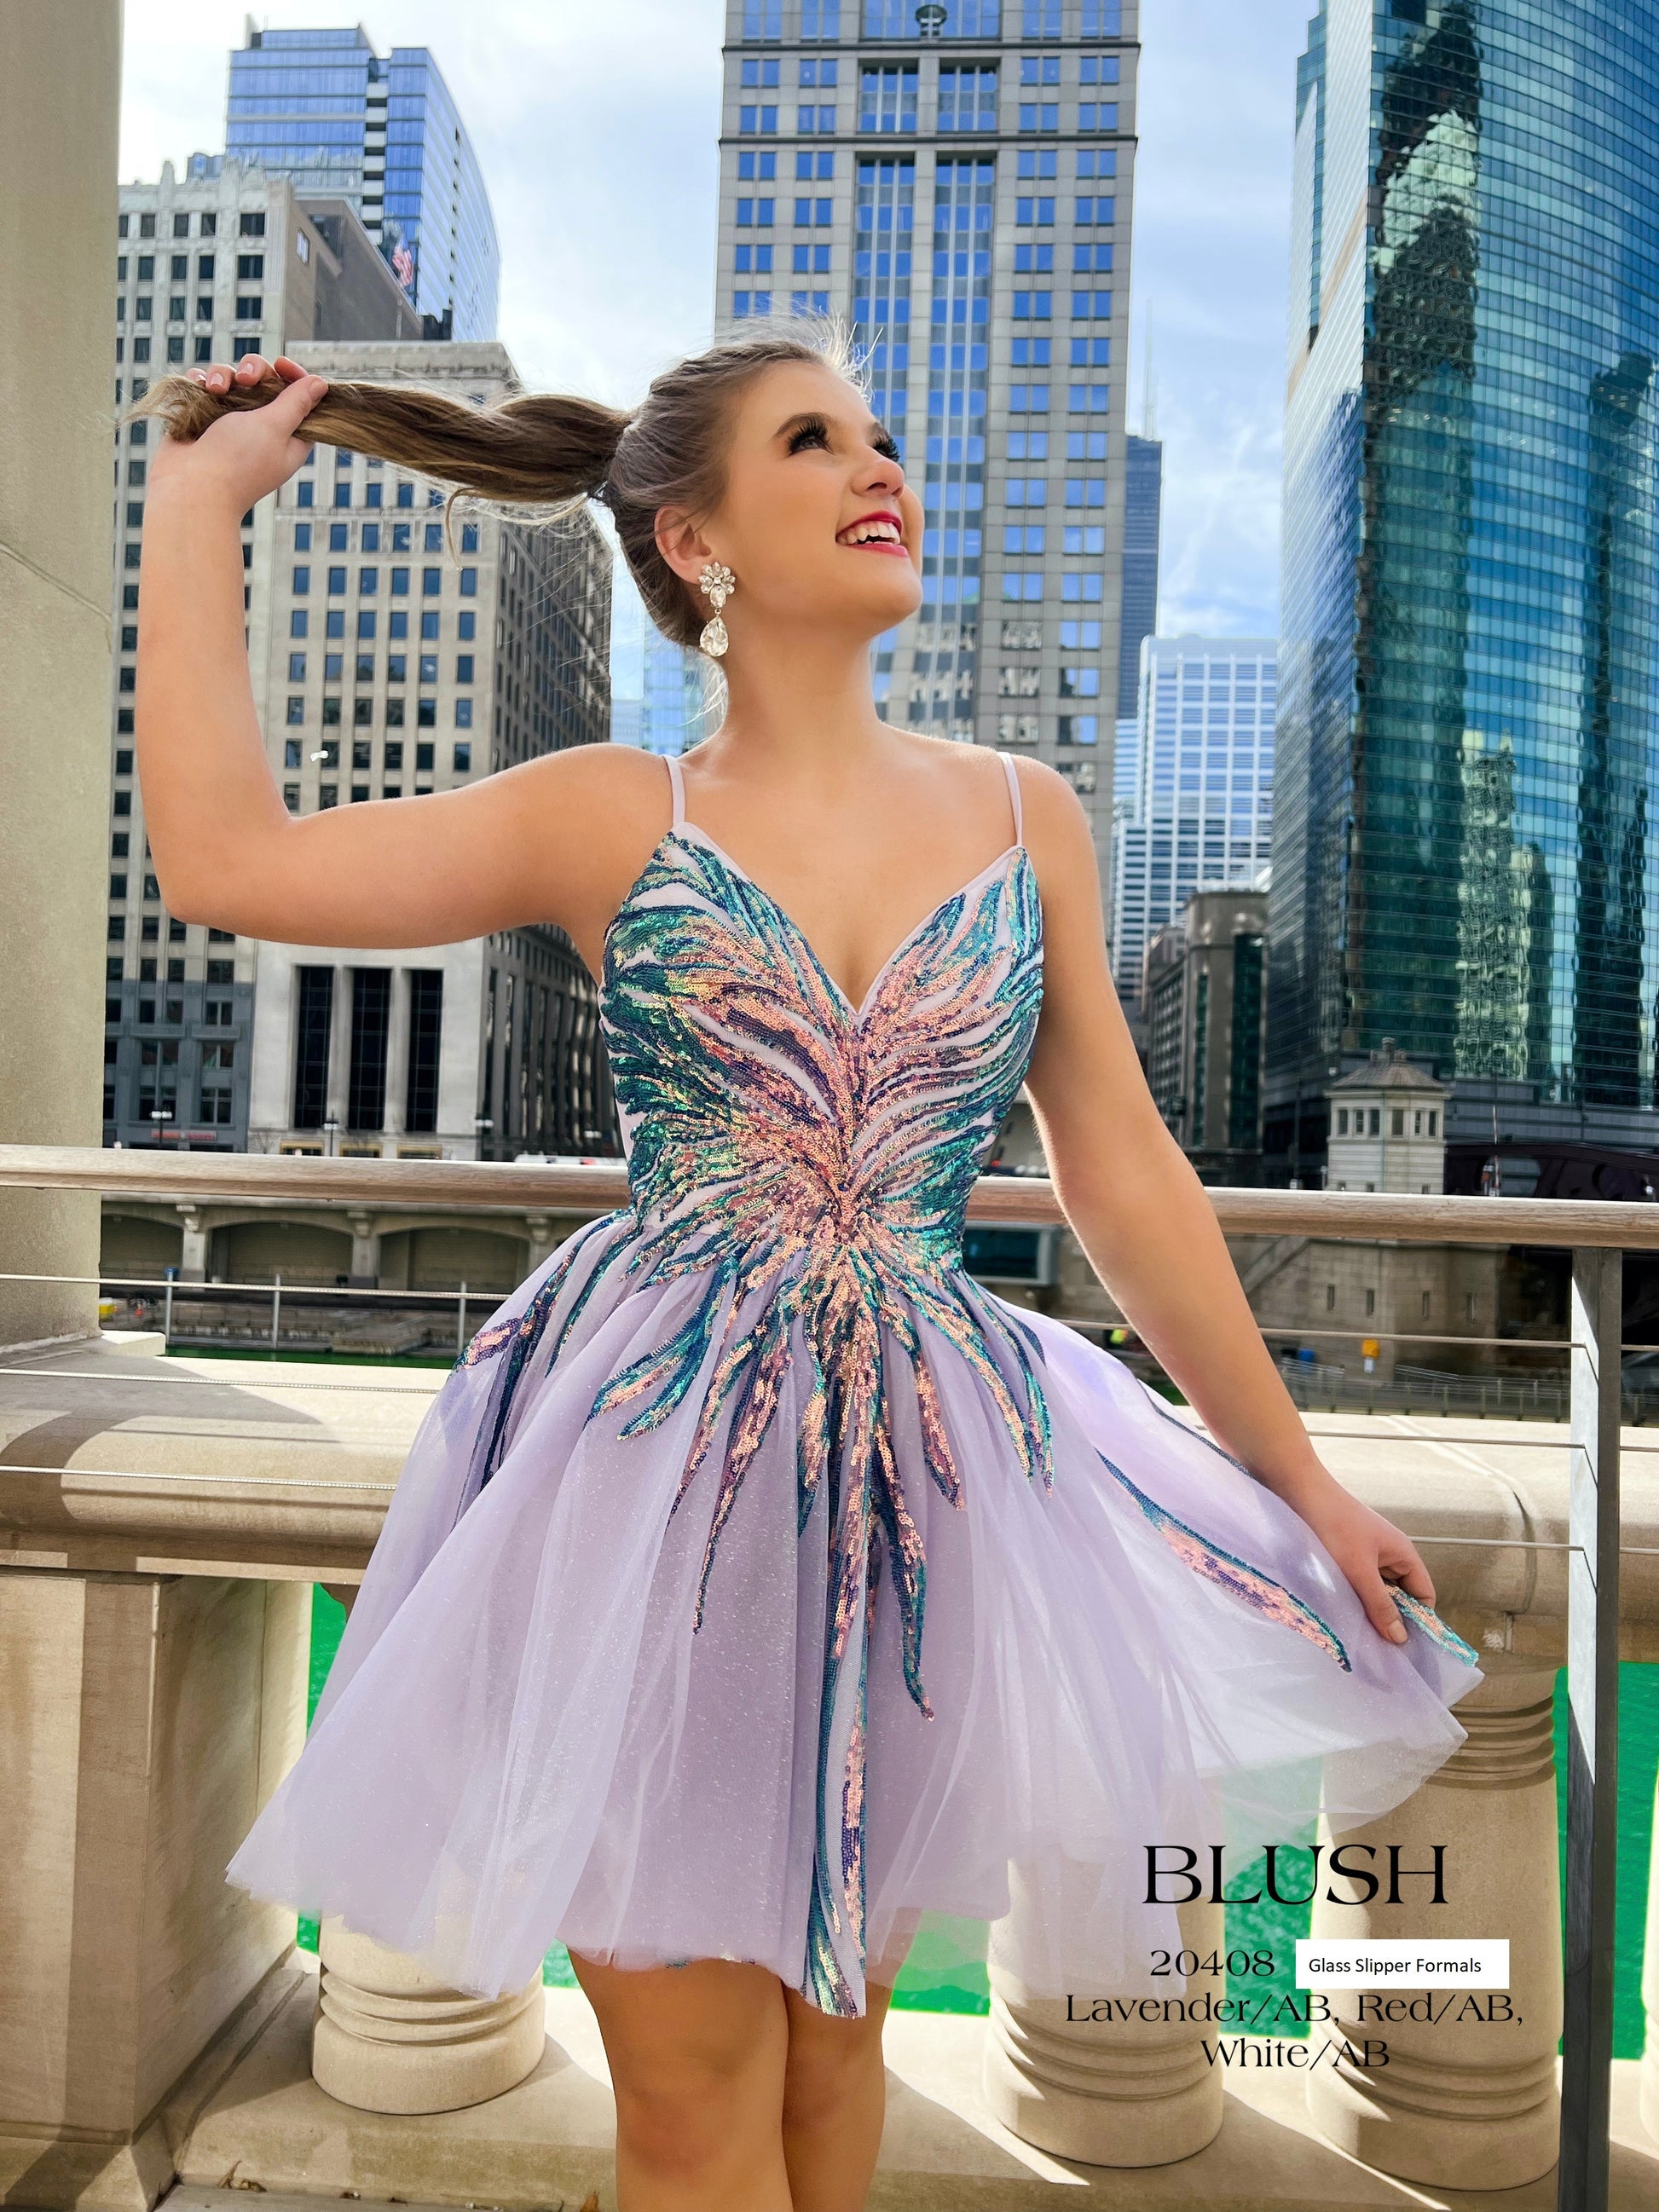 Blush Prom 20408 is a Short Shimmering Backless Formal Cocktail Dress with Sequin accents along the bust & bodice. This Fit & Flare Gown is fun for any formal event!  Available Sizes: 0-24  Available Colors: Lavender/AB, Red/AB, White/AB